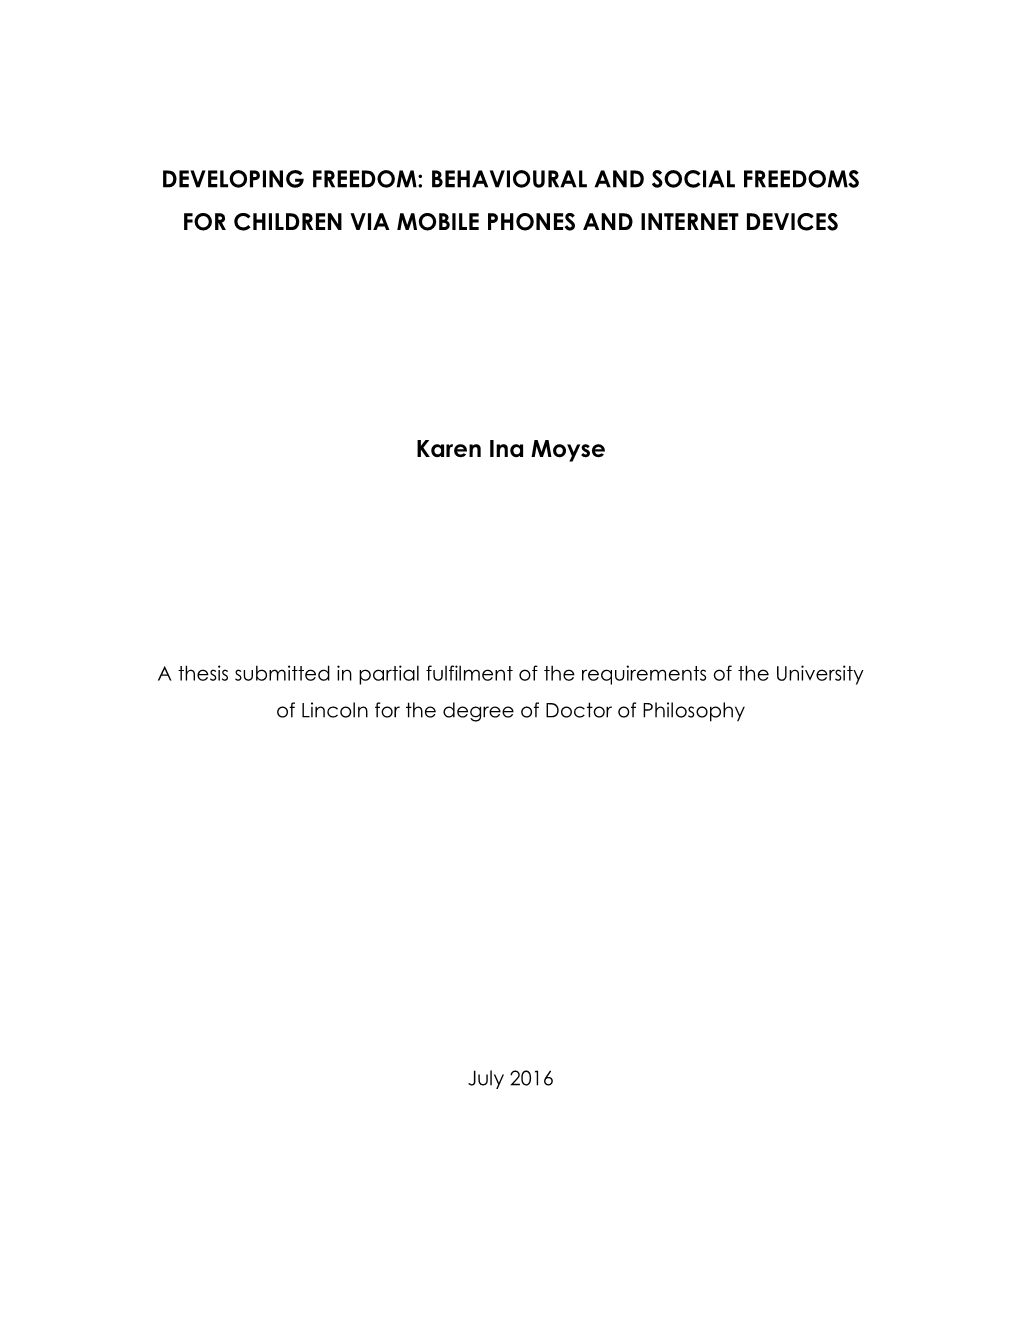 Developing Freedom: Behavioural and Social Freedoms for Children Via Mobile Phones and Internet Devices